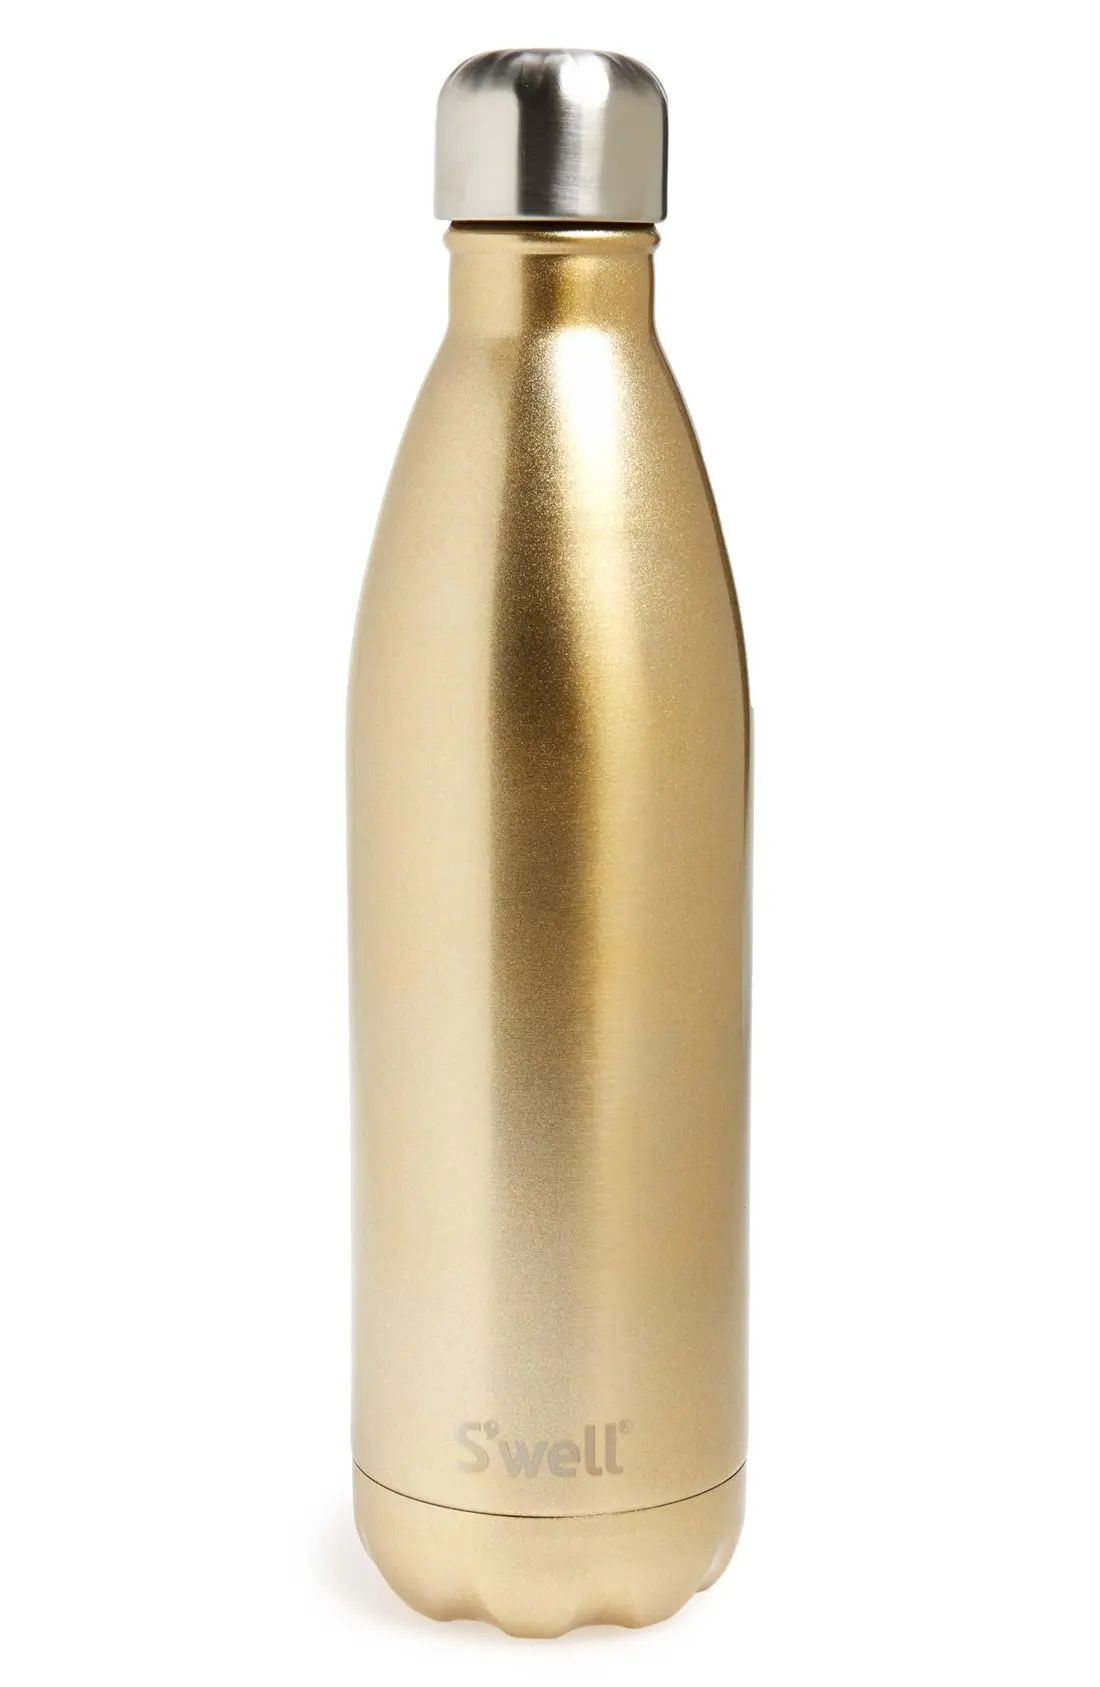 S'well 'Sparkling Champagne' Stainless Steel Water Bottle | Nordstrom